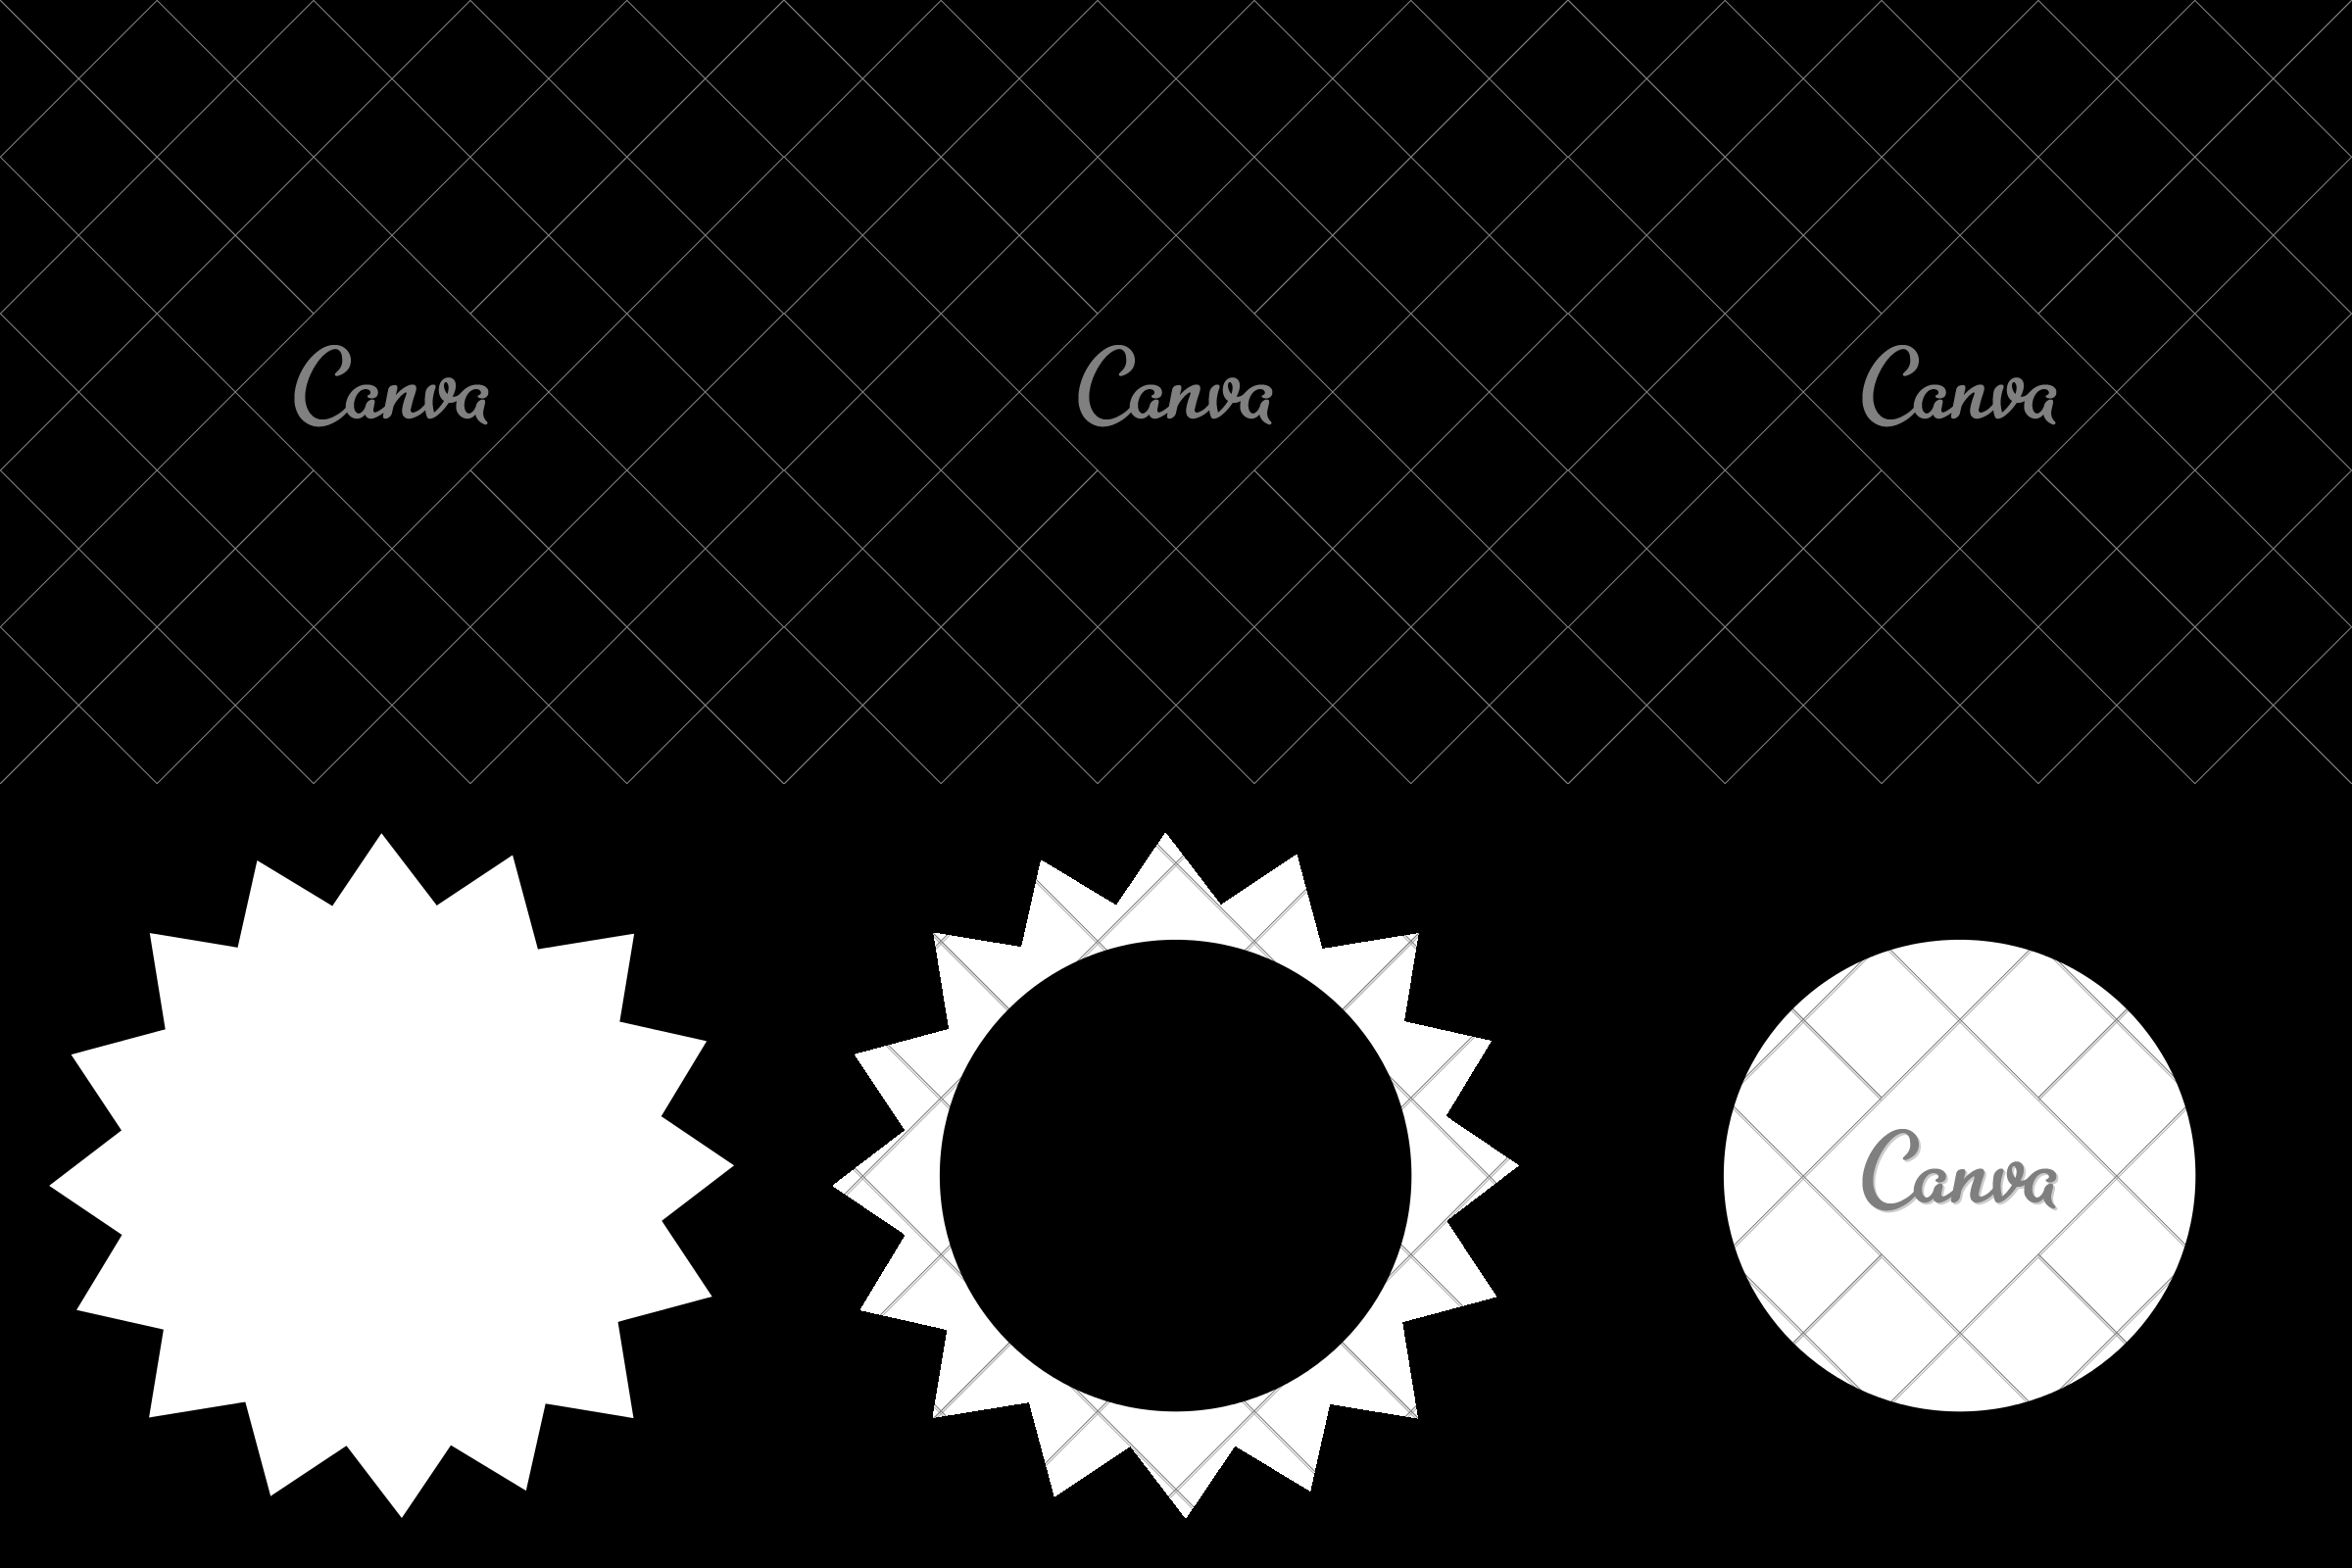 Black Weather Logo - Black Sun Weather Design Vector Icon Illustration - Icons by Canva